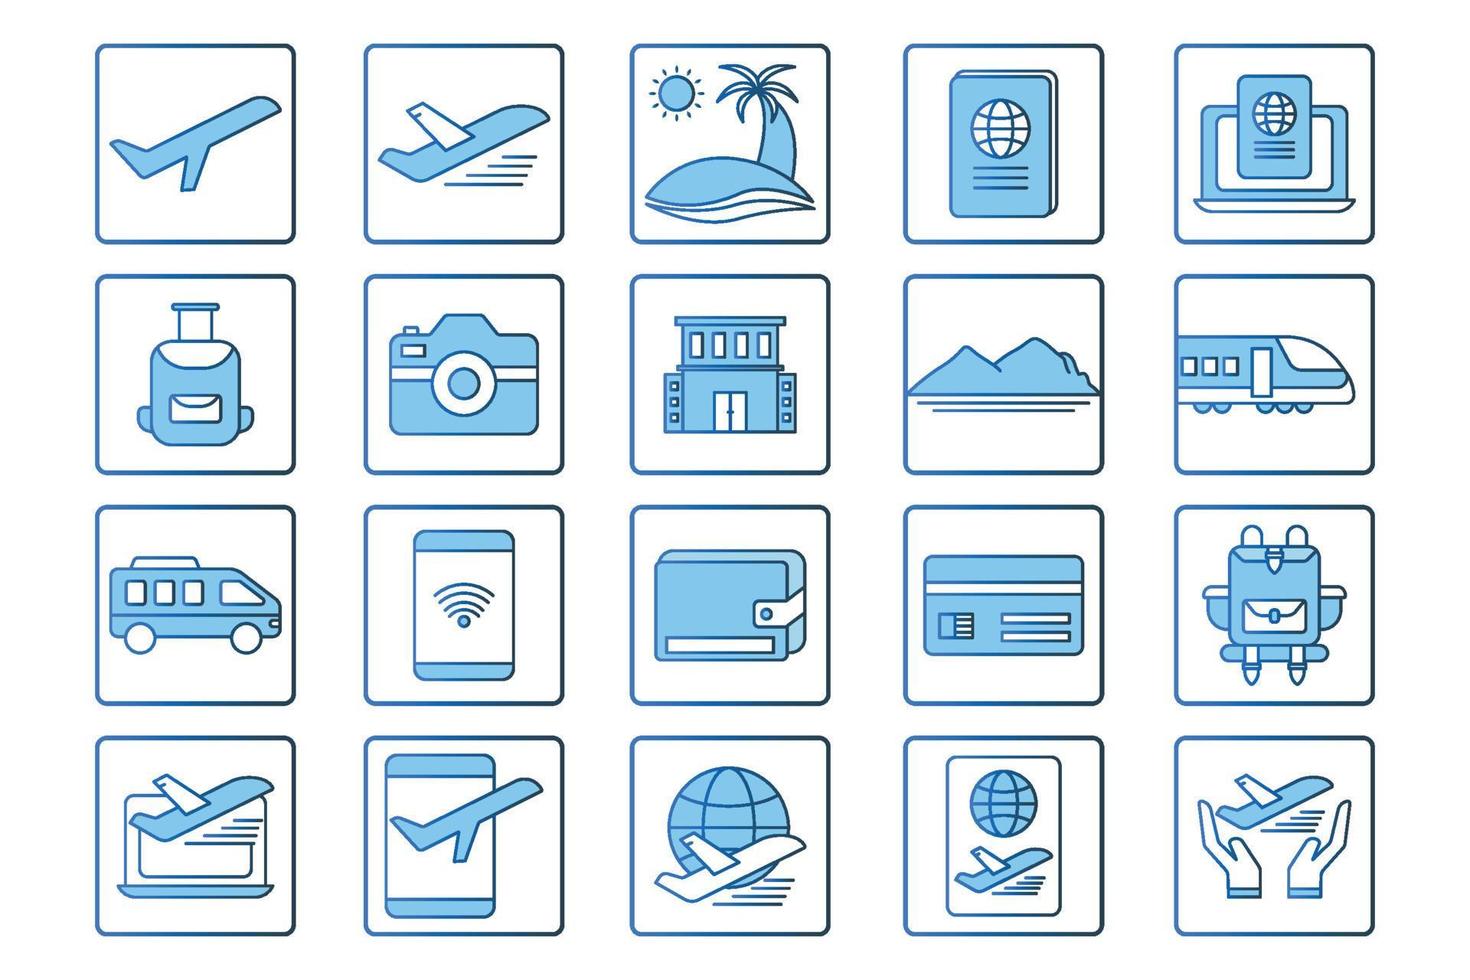 Travel set icon illustration. icon related to Transportation, holiday, tourists. Flat line icon style. Simple vector design editable